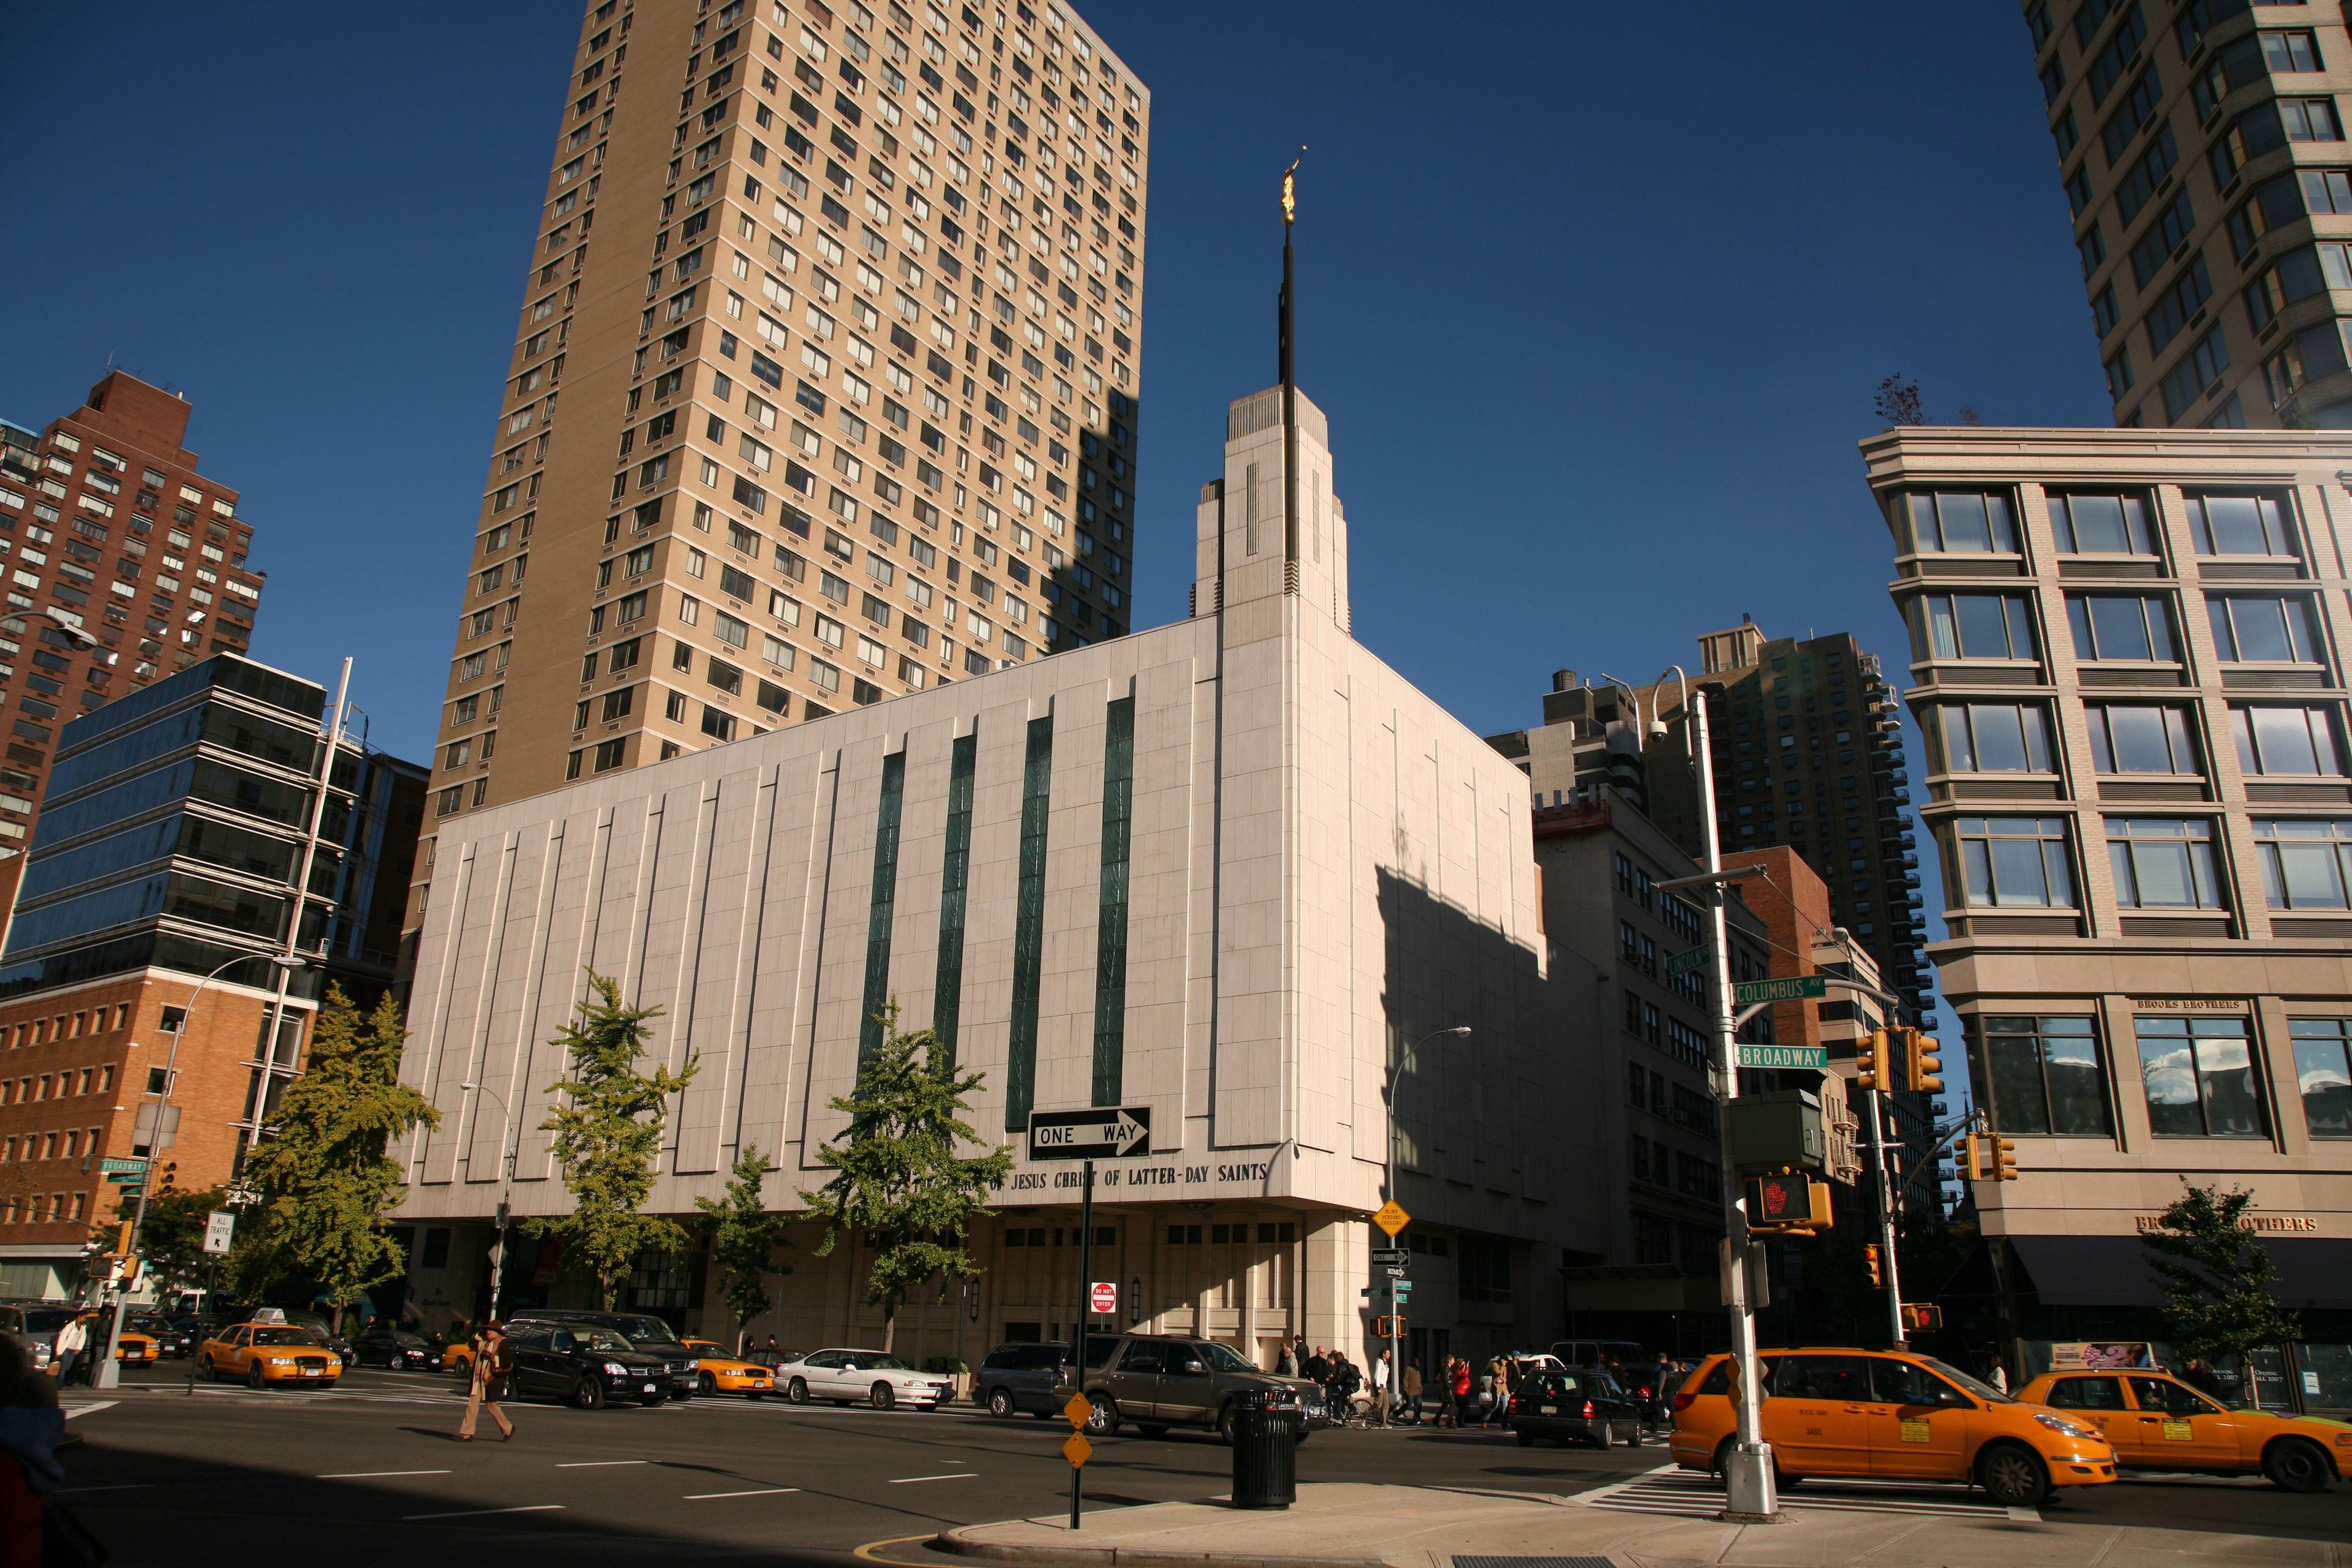 The Manhattan New York Temple, including the scenery and entrance.